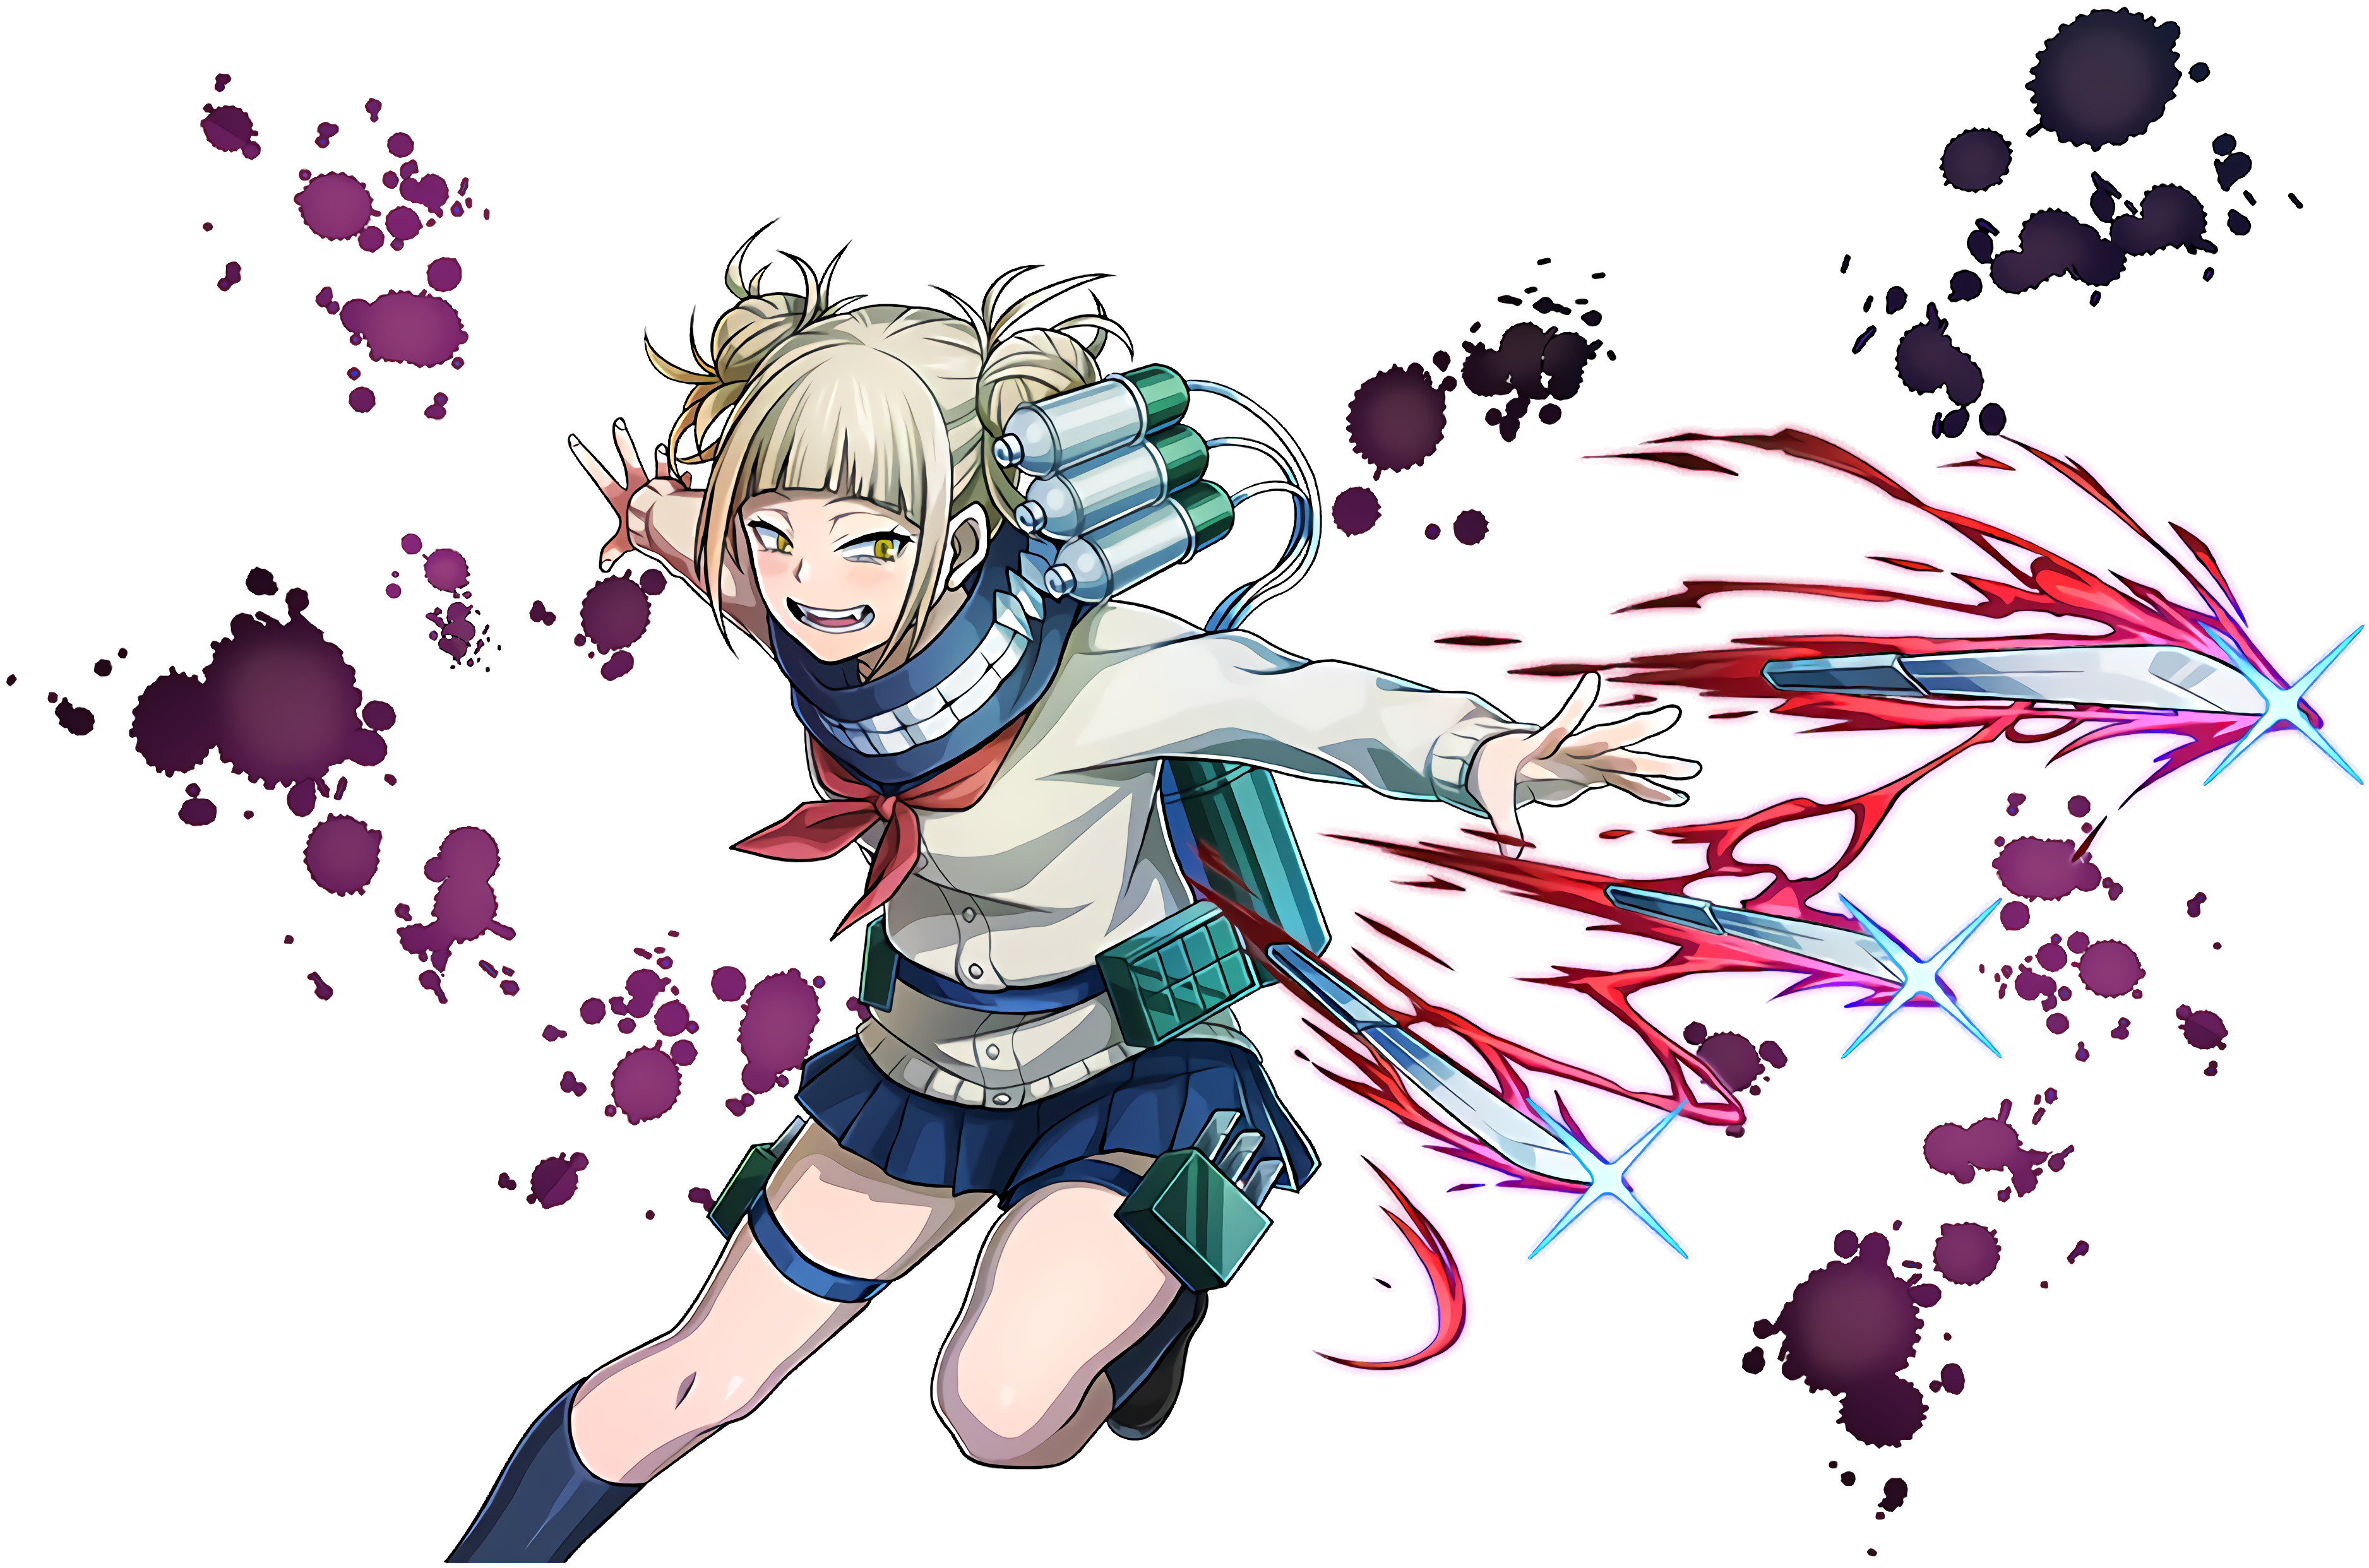 PC / Computer - My Hero Ultra Rumble - Himiko Toga - The Spriters Resource